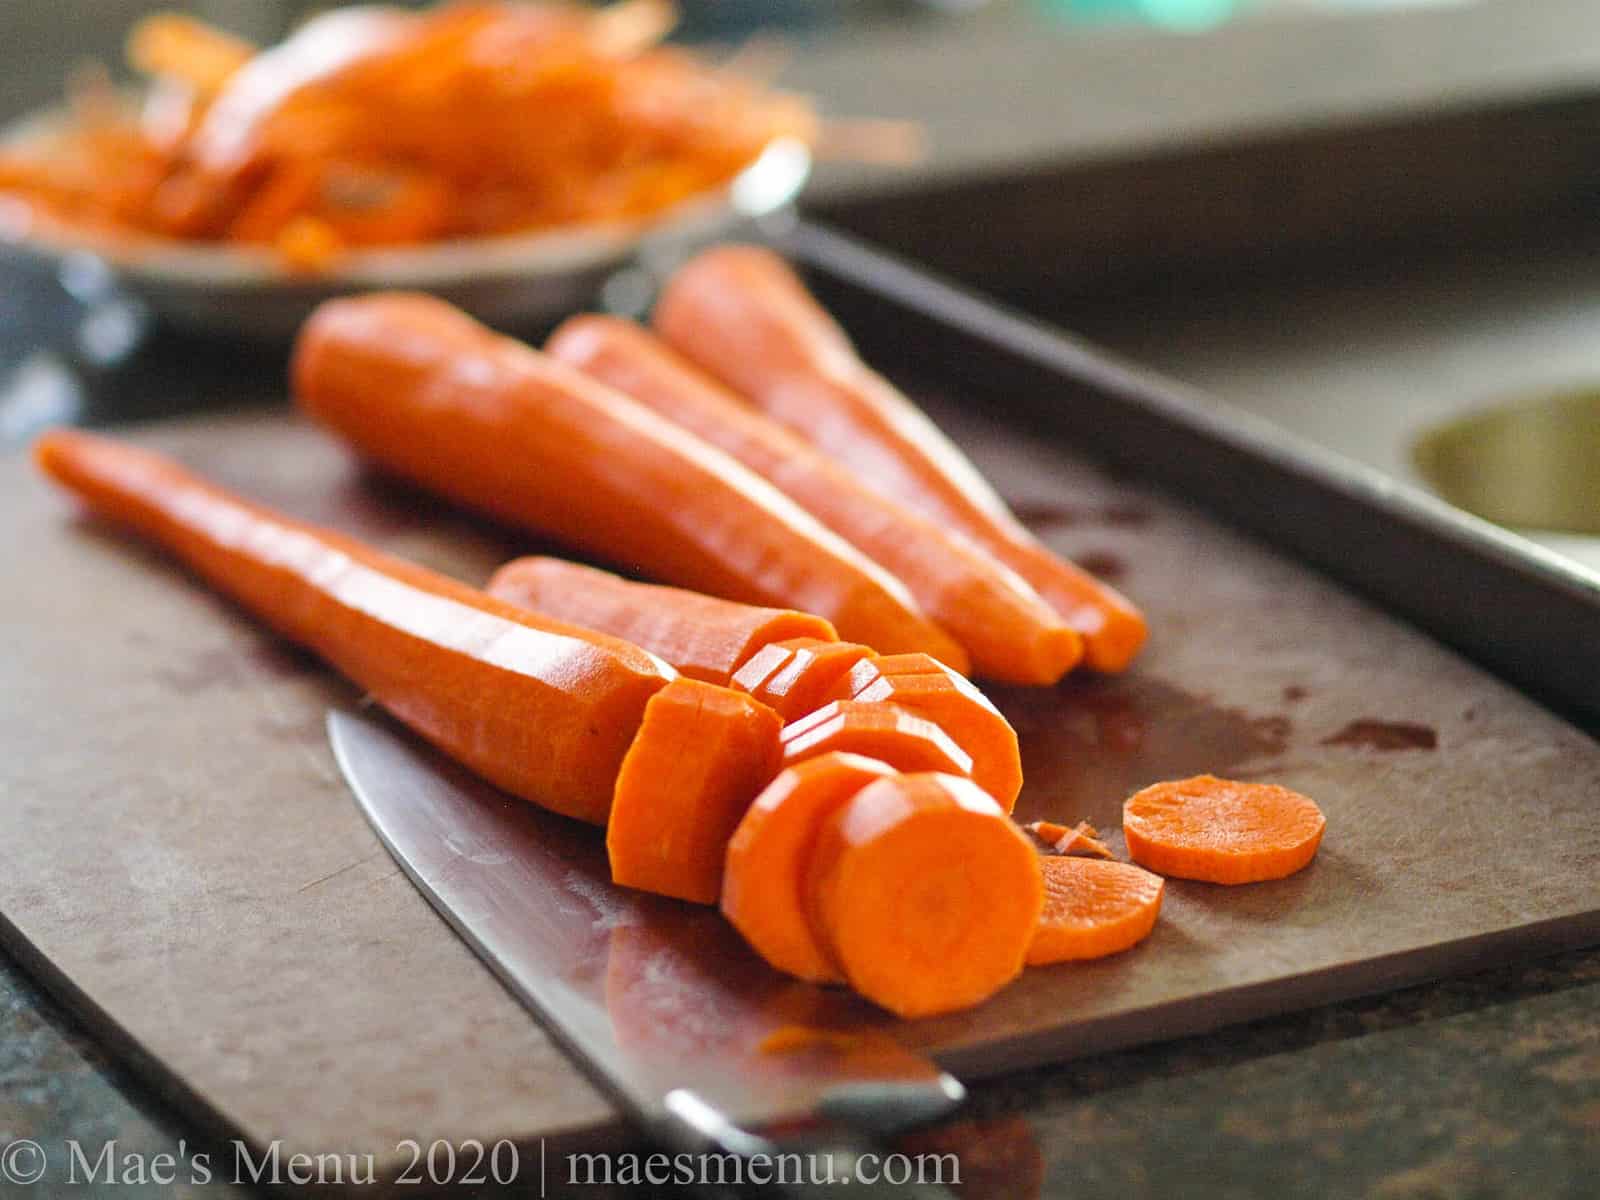 Cutting up carrots for Oven Roasted Turmeric & Cumin Carrots.